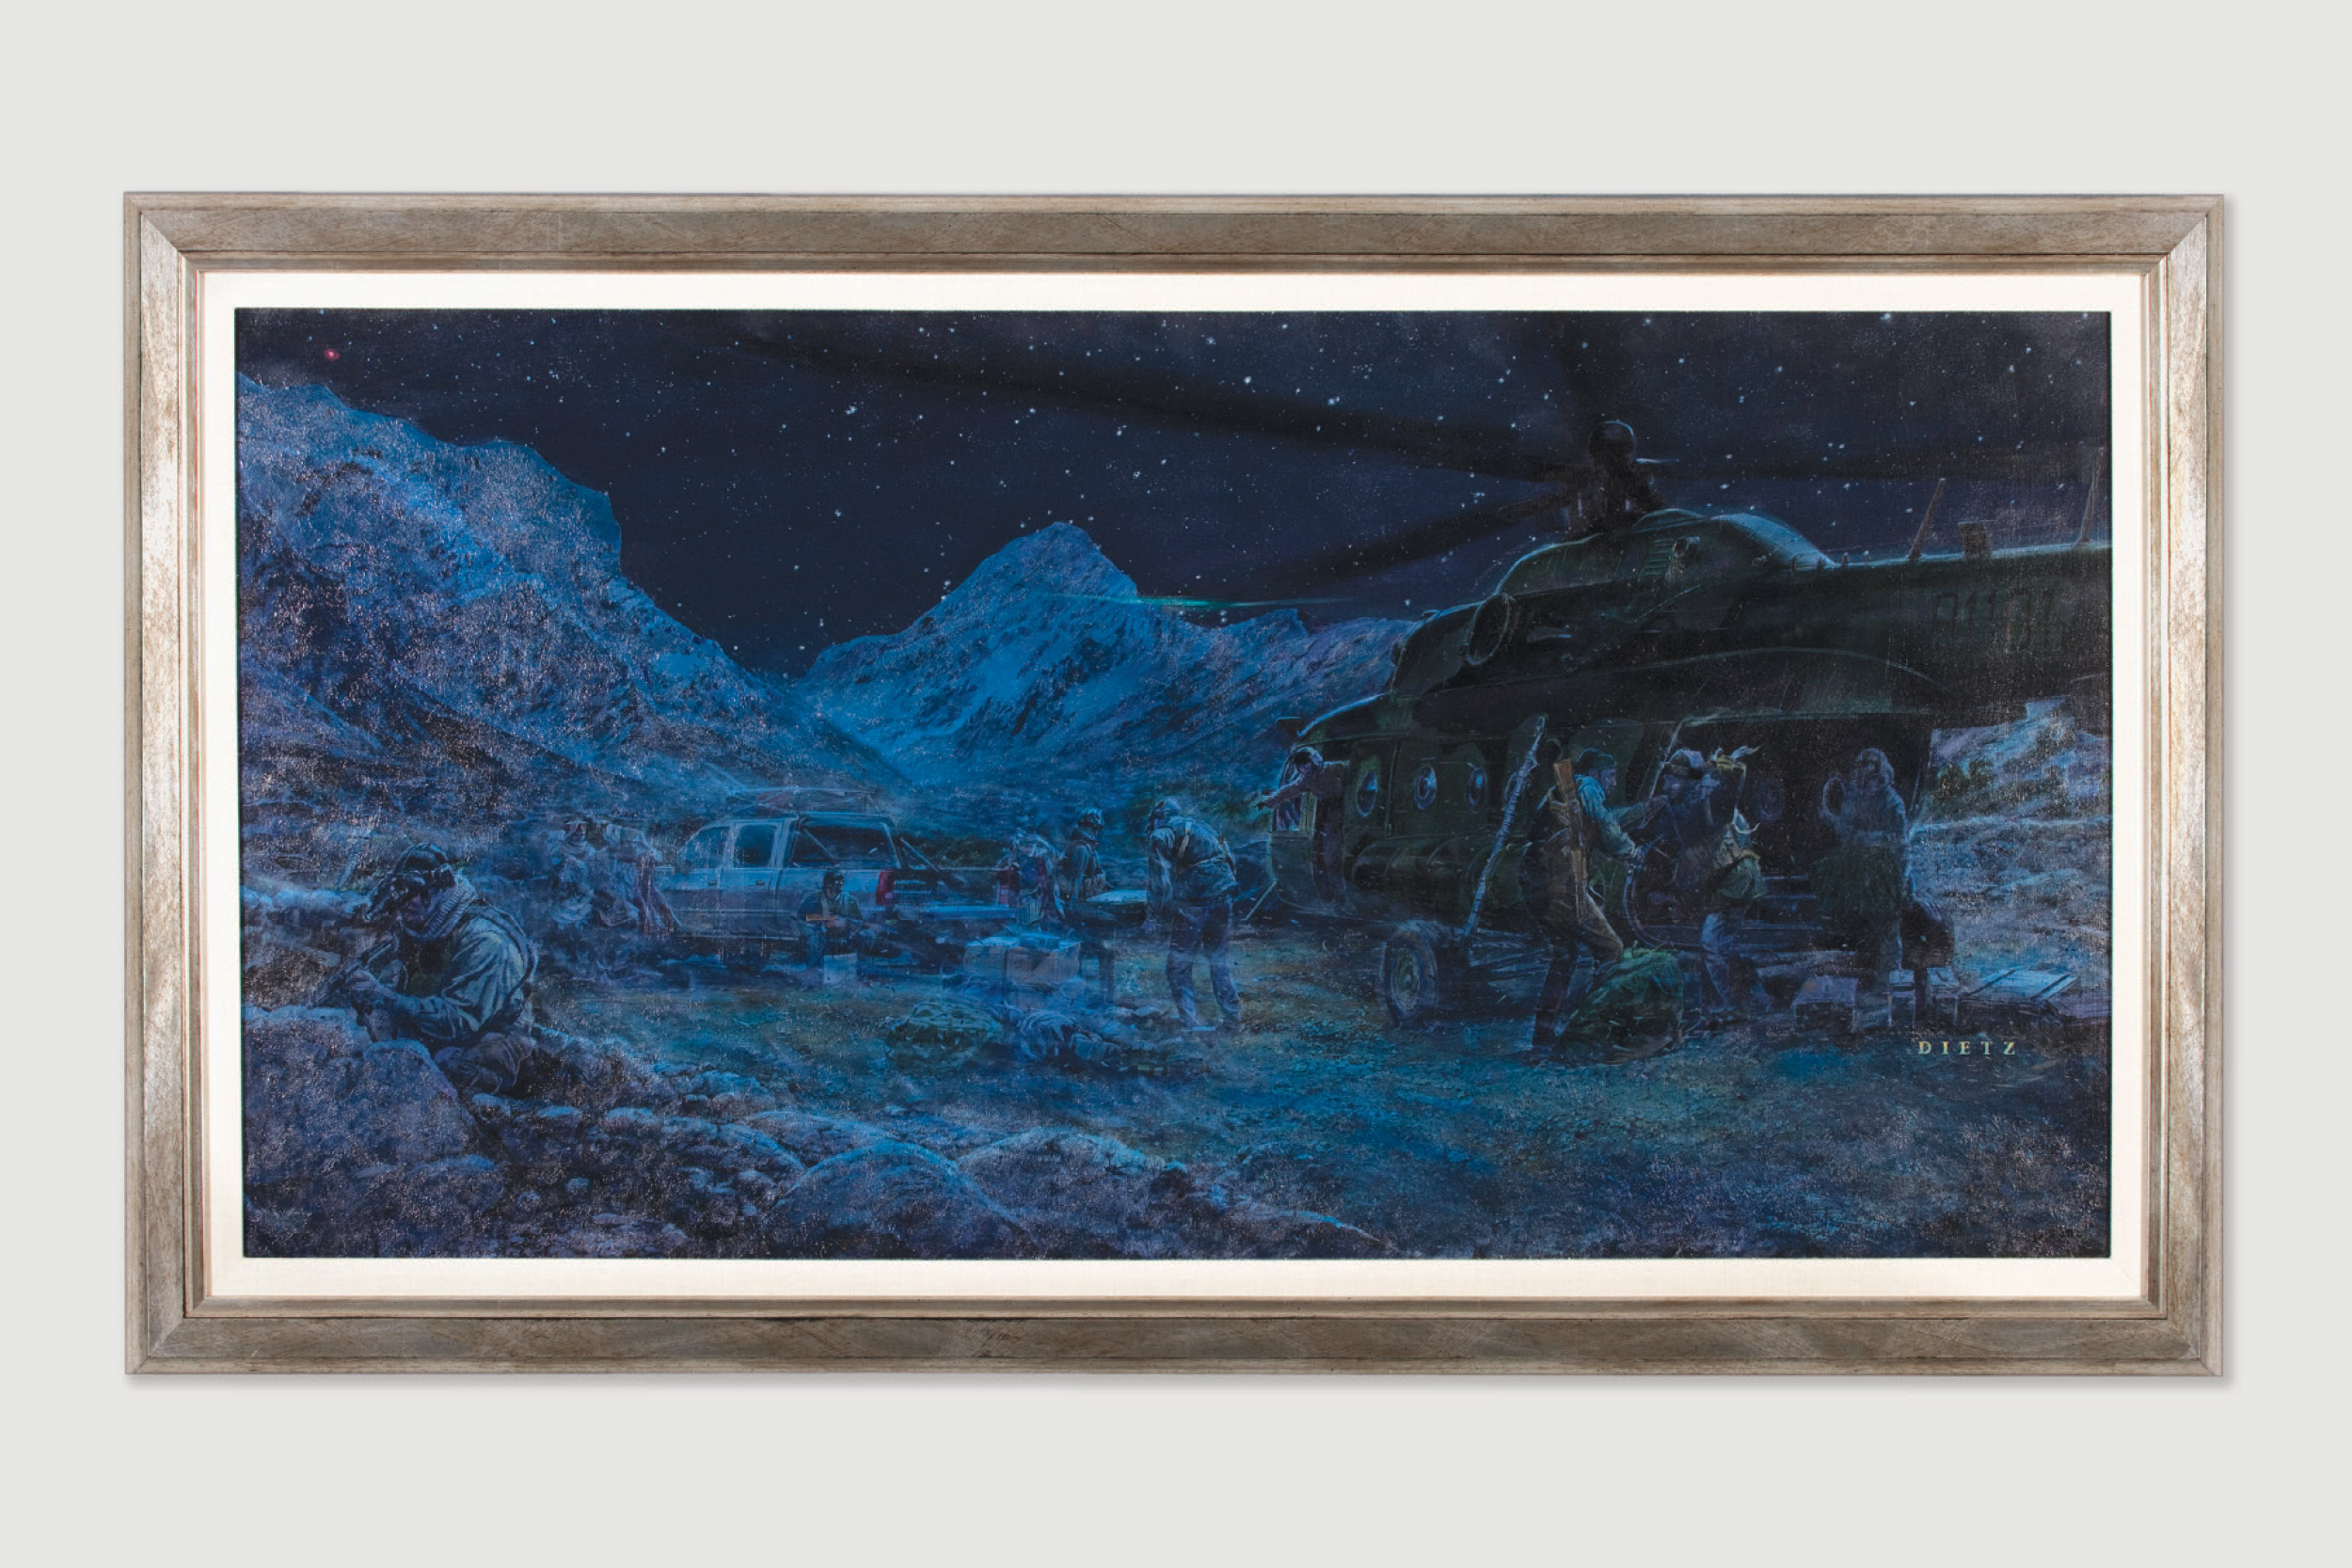 James Diaz, Cast of a Few, Courage of a Nation, 2008. The painting depicts a scene from the war in Afghanistan after September 11, 2001.